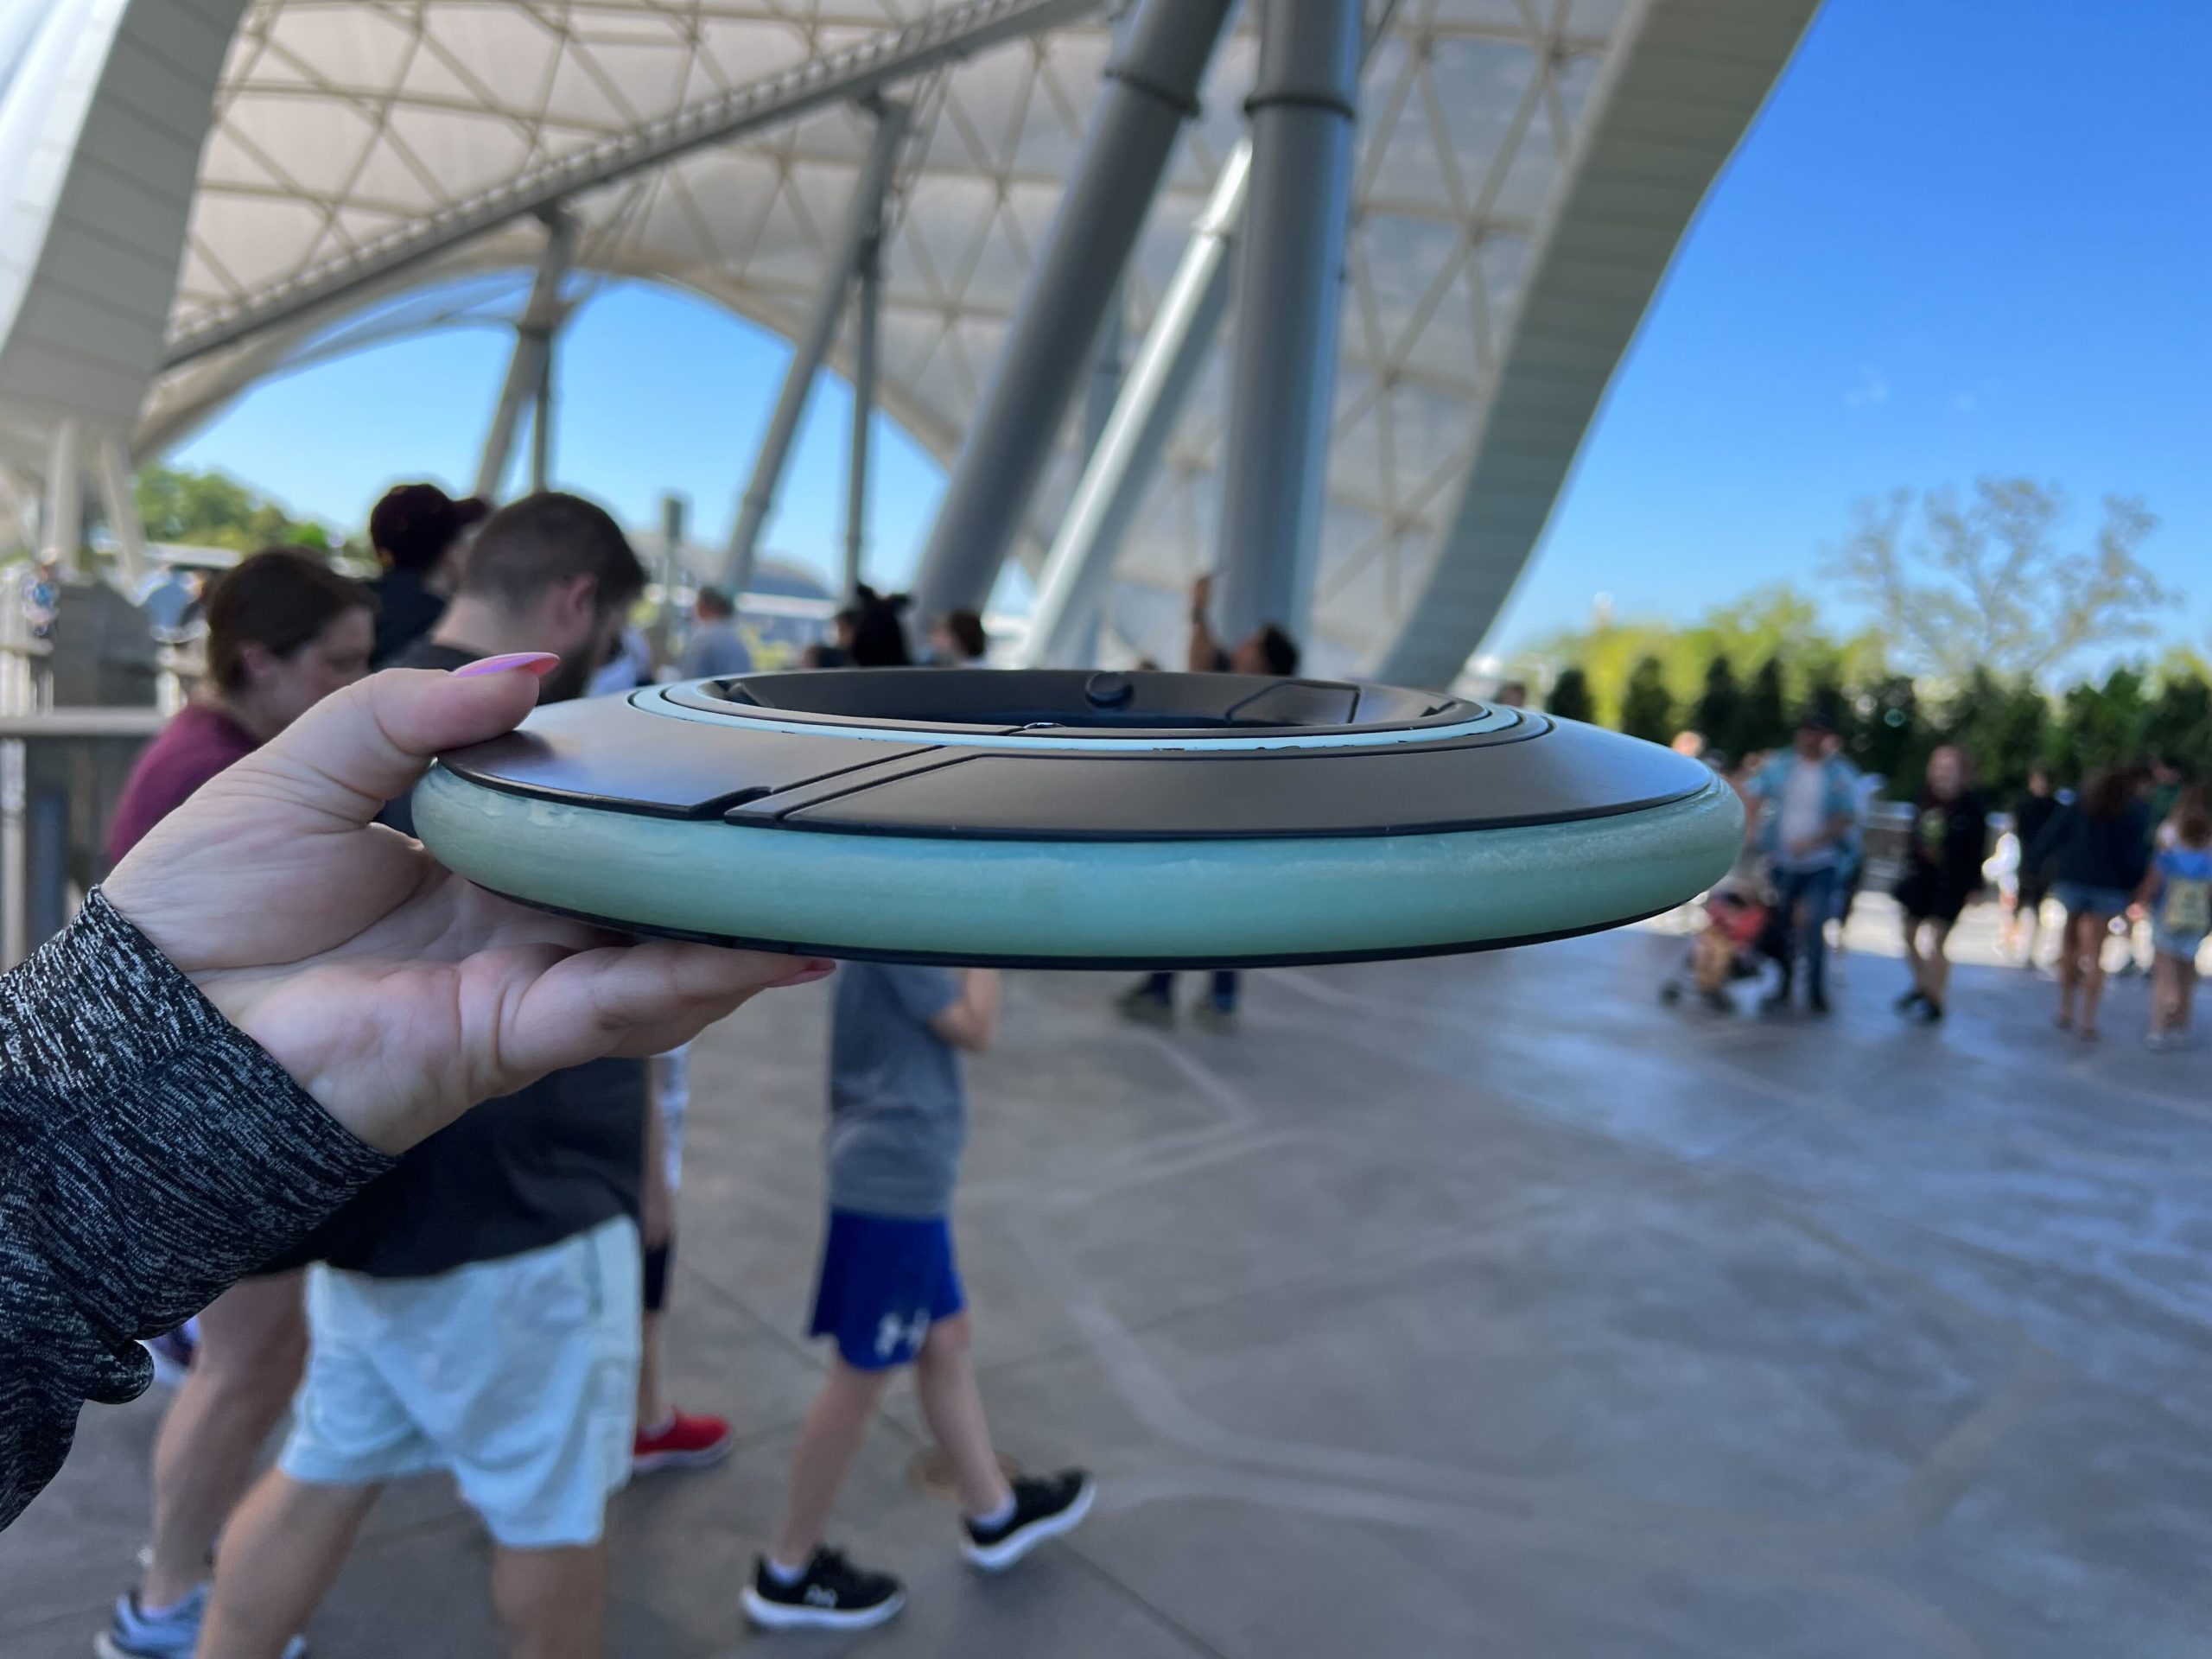 New bin for locker cards and identity disk for photopass at Tron Lightcyle / Run